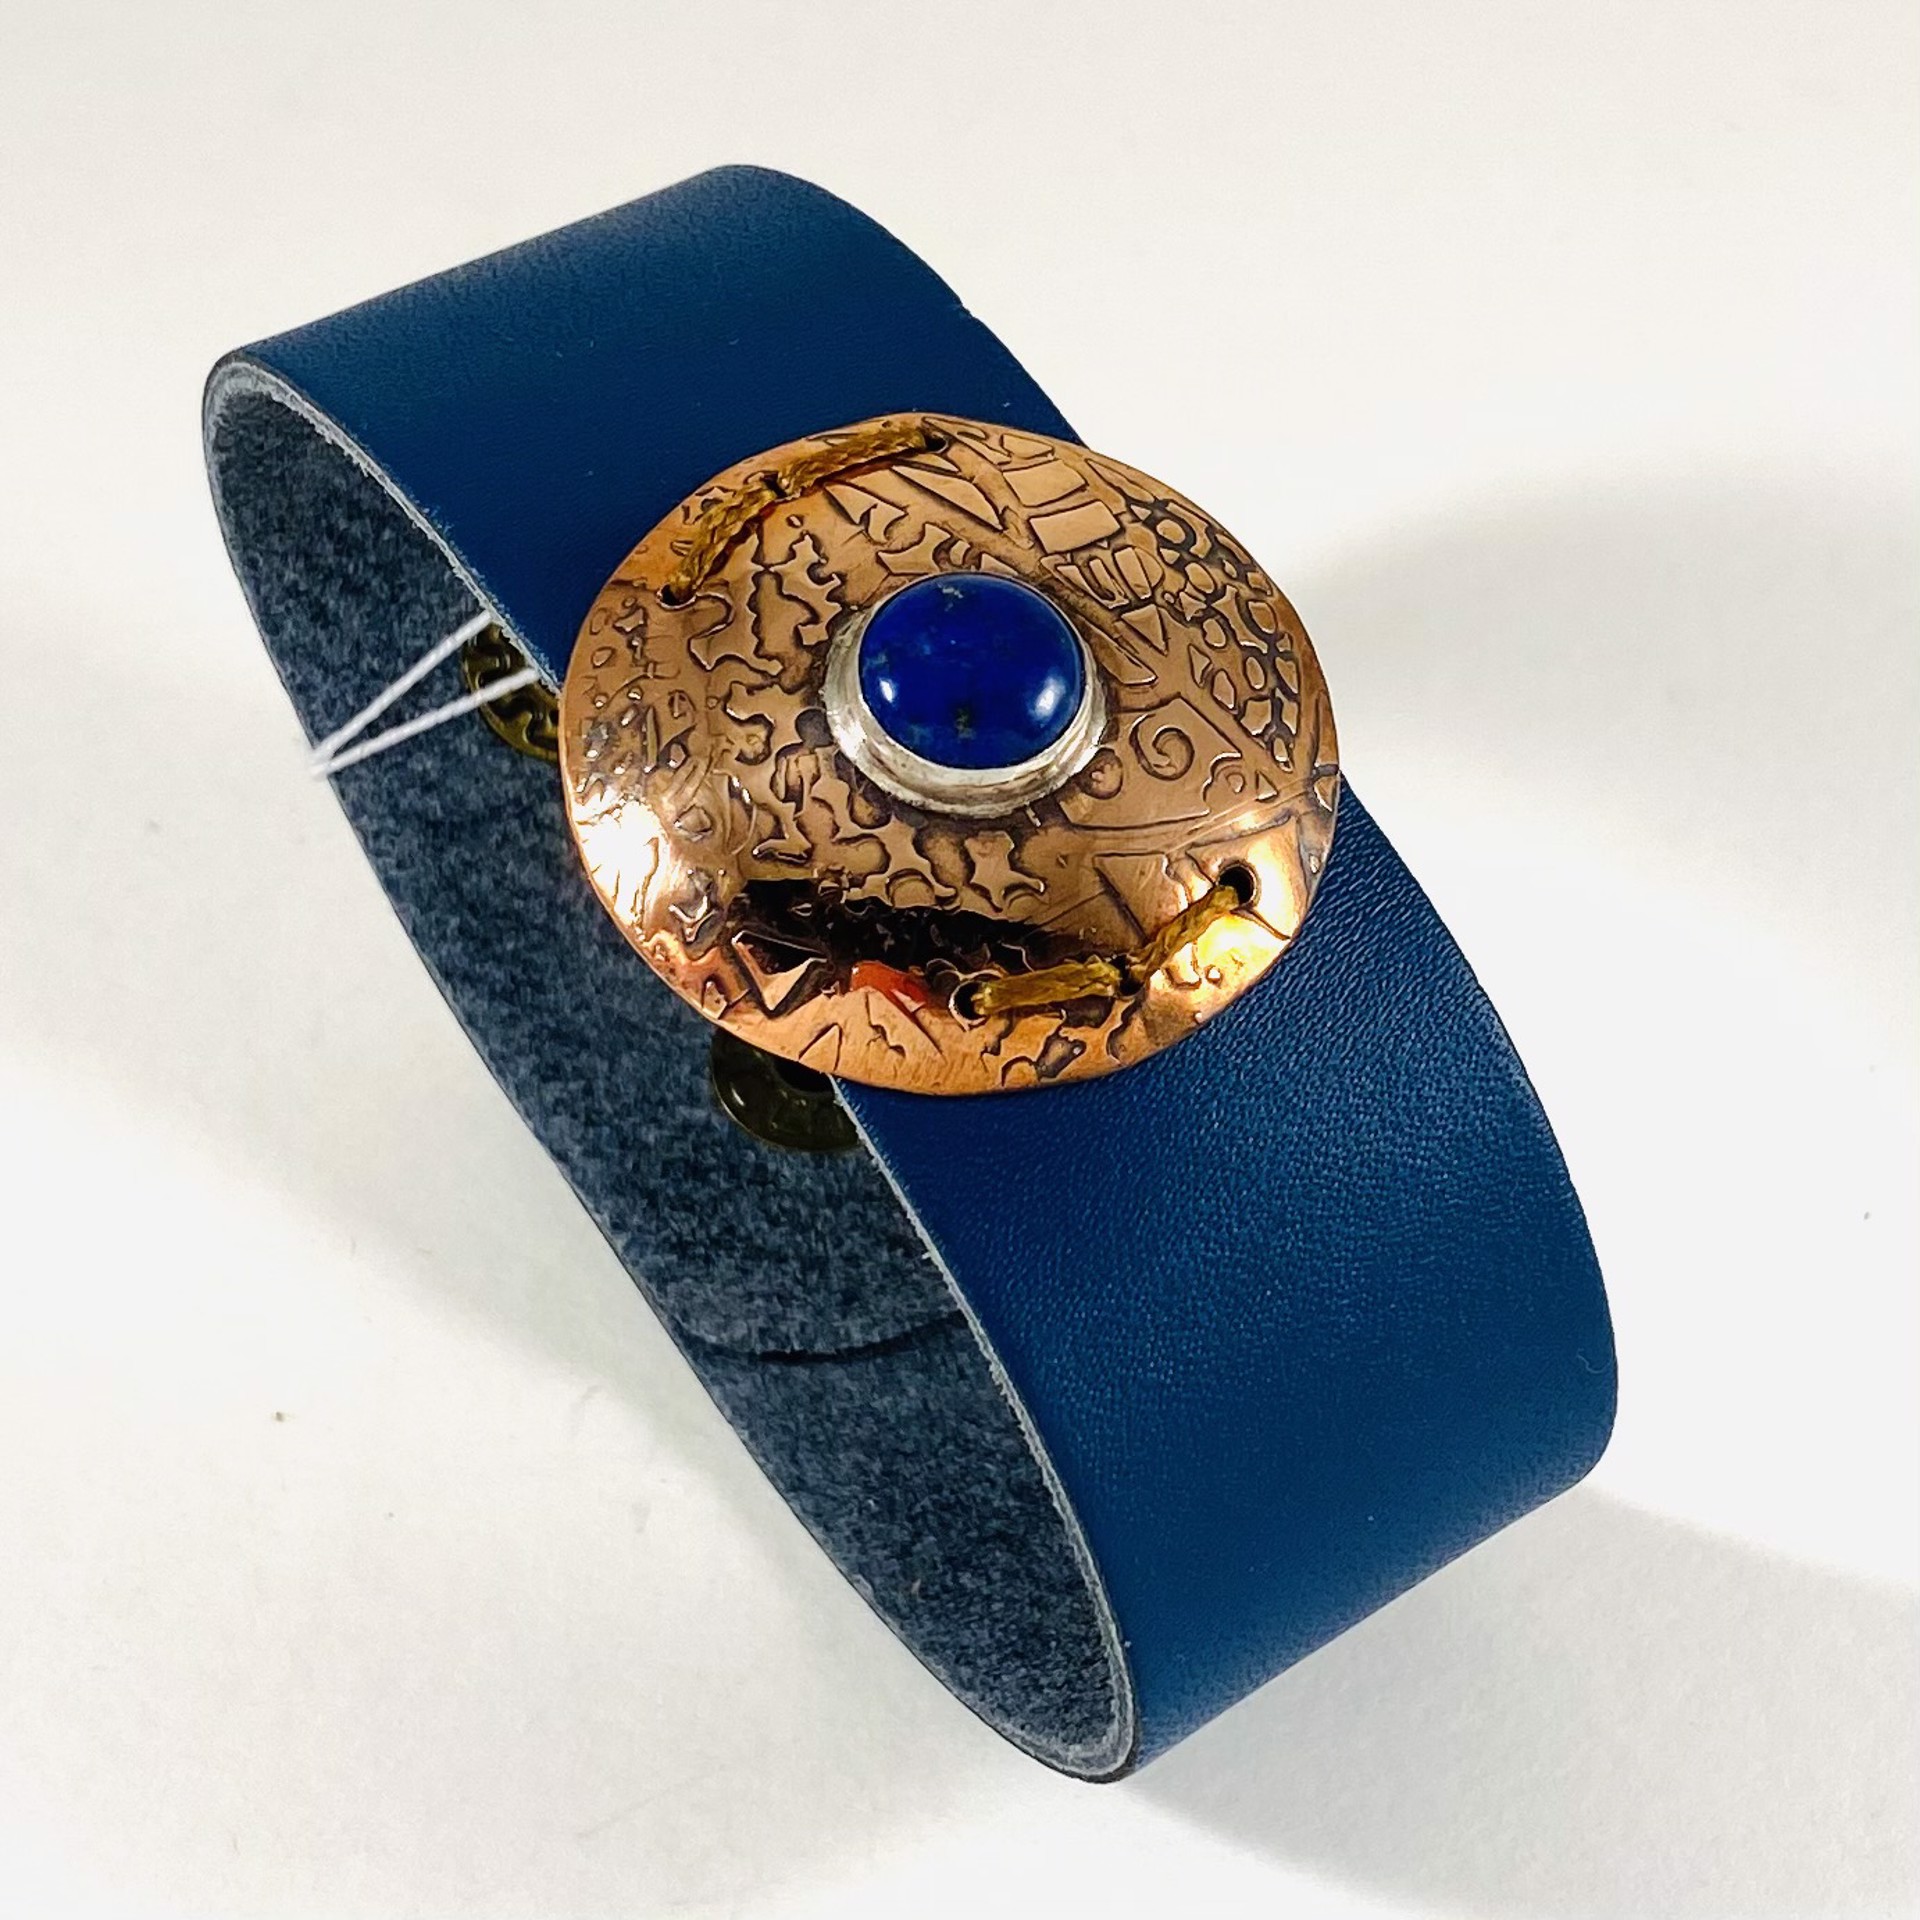 AB21-38 Lapis and Copper on Leather Cuff Bracelet by Anne Bivens